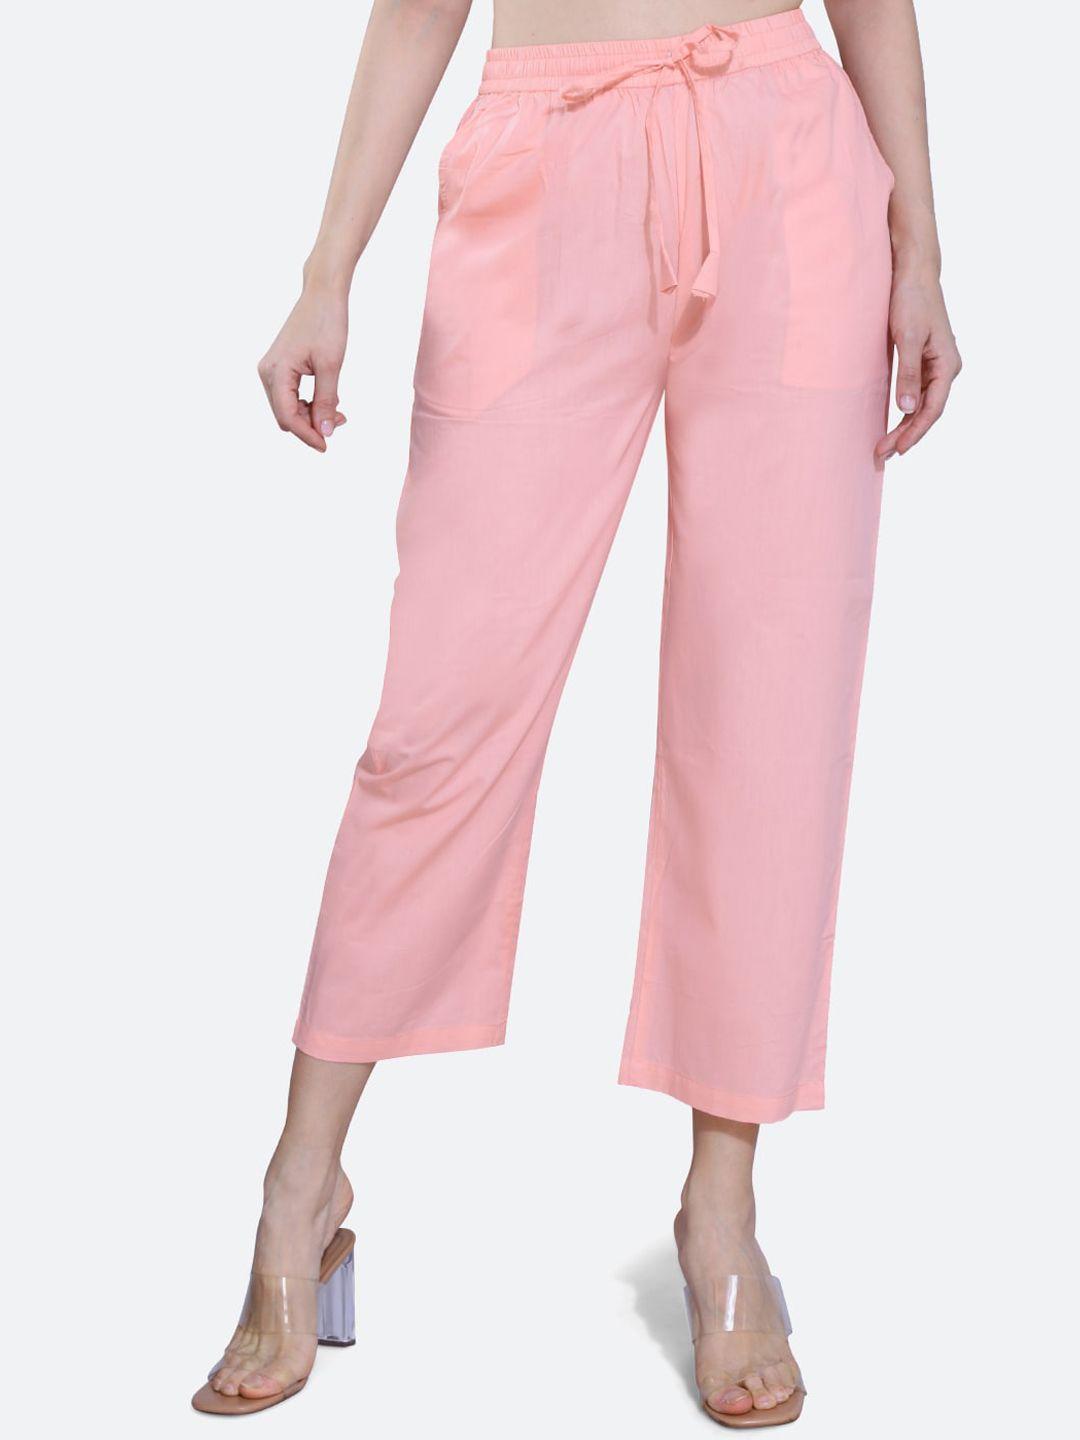 fck-3 women peach-coloured relaxed high-rise easy wash culottes trousers